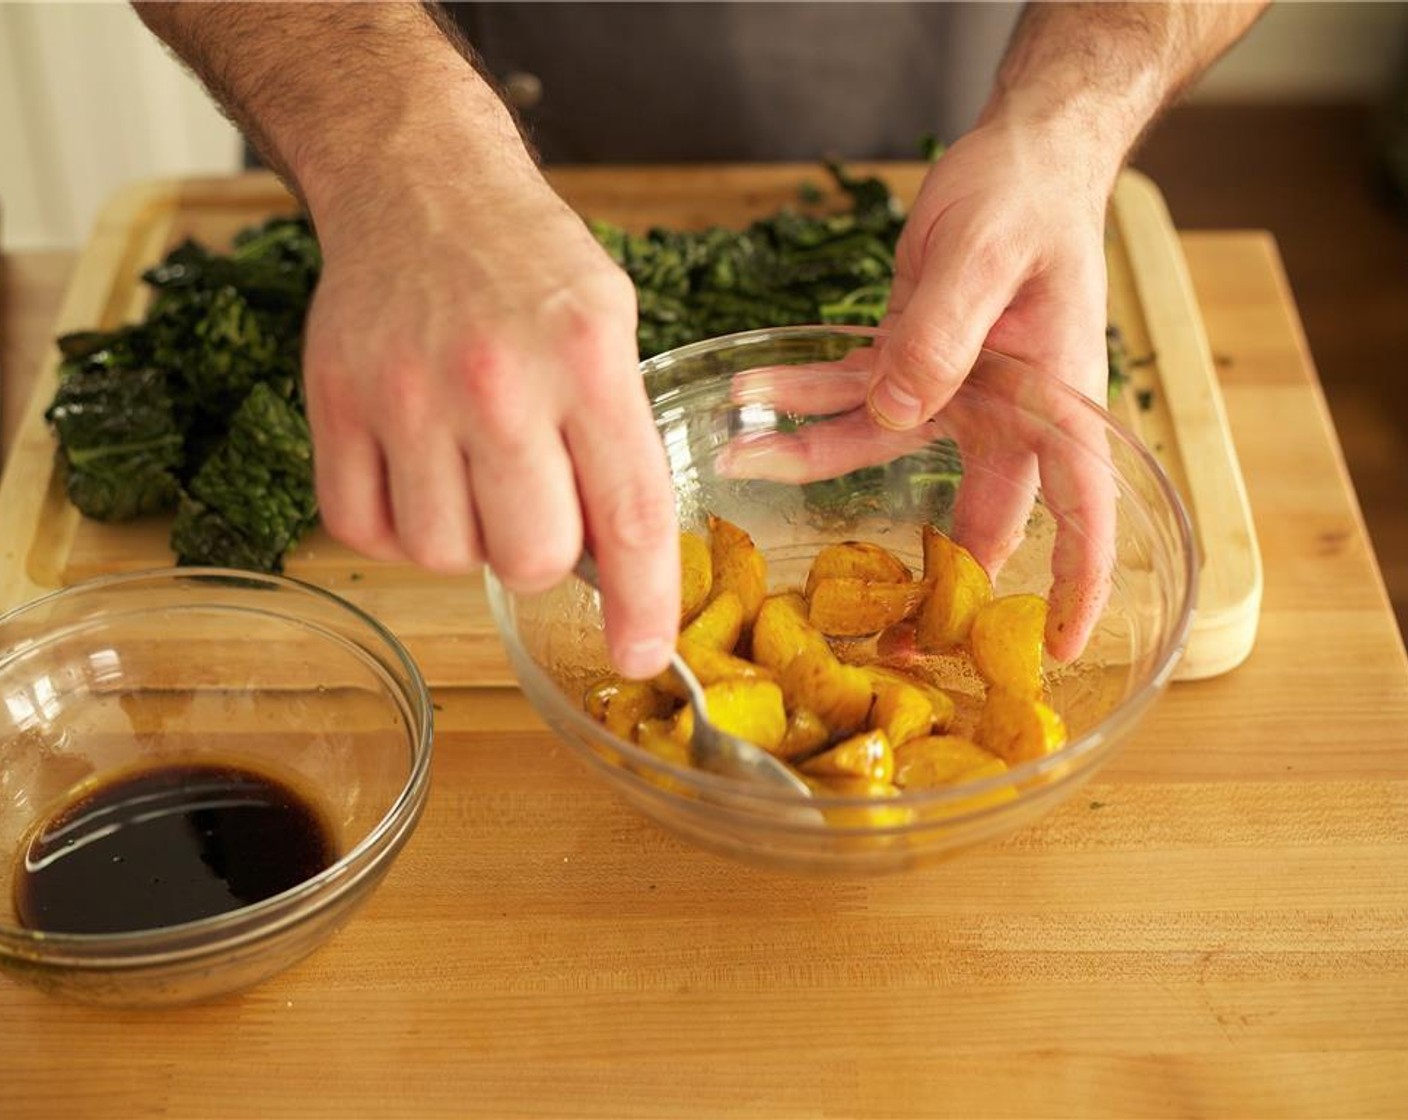 step 8 Roughly chop kale into bite sized pieces and place in a large bowl. Toss beets in medium bowl with half of the dressing and set aside. Toss kale with remainder of dressing in a large bowl and hold for plating.